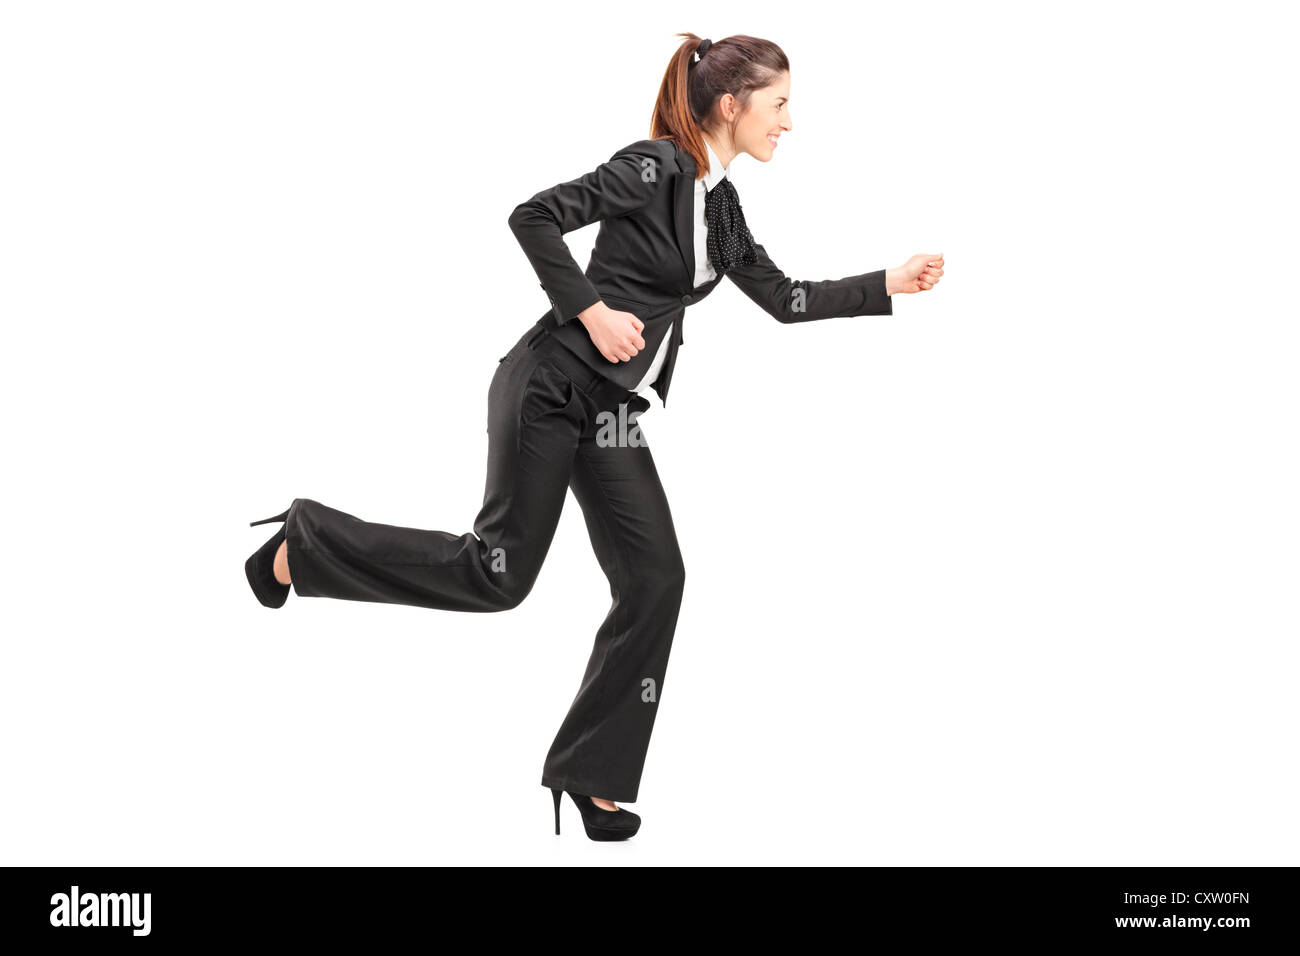 Full length portrait of a businesswoman in hurry running isolated on white background Stock Photo